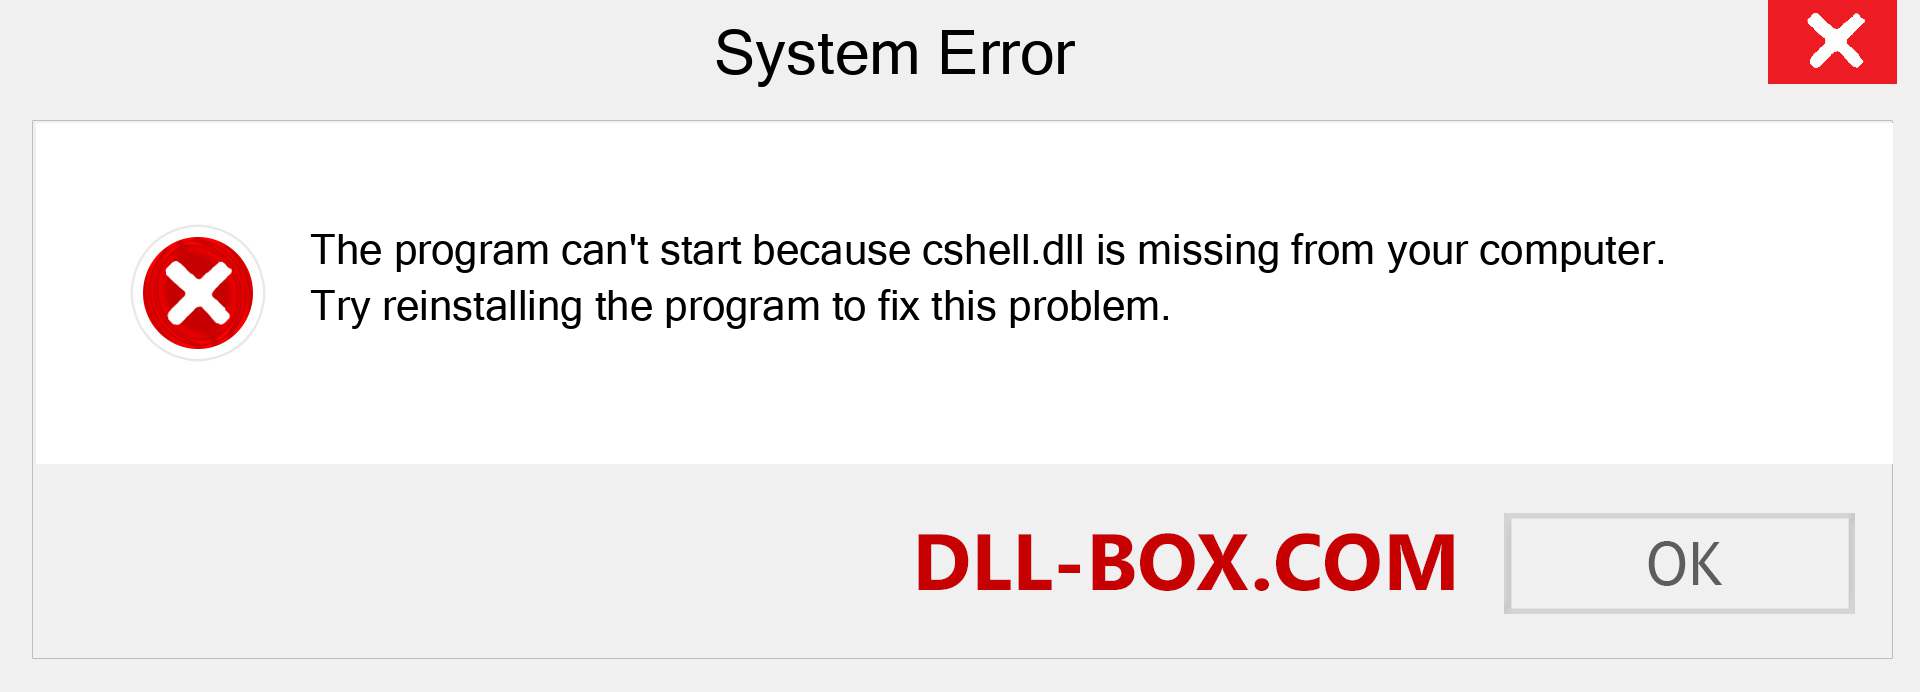  cshell.dll file is missing?. Download for Windows 7, 8, 10 - Fix  cshell dll Missing Error on Windows, photos, images